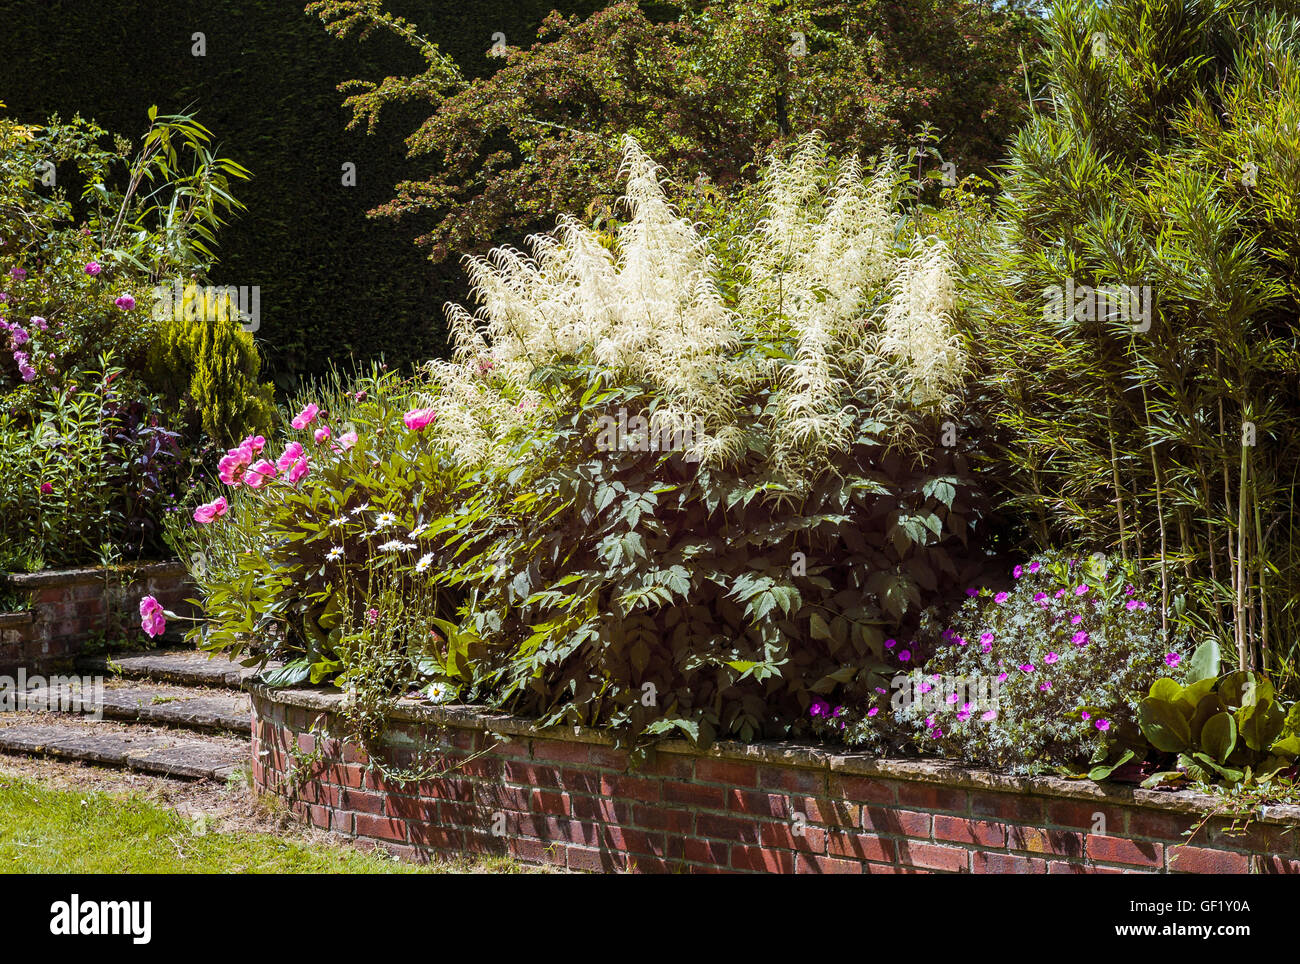 RAISED HERBACEOUS BORDER WITH PEONIES AND ARUNCUS PLANTS in an English garden Stock Photo